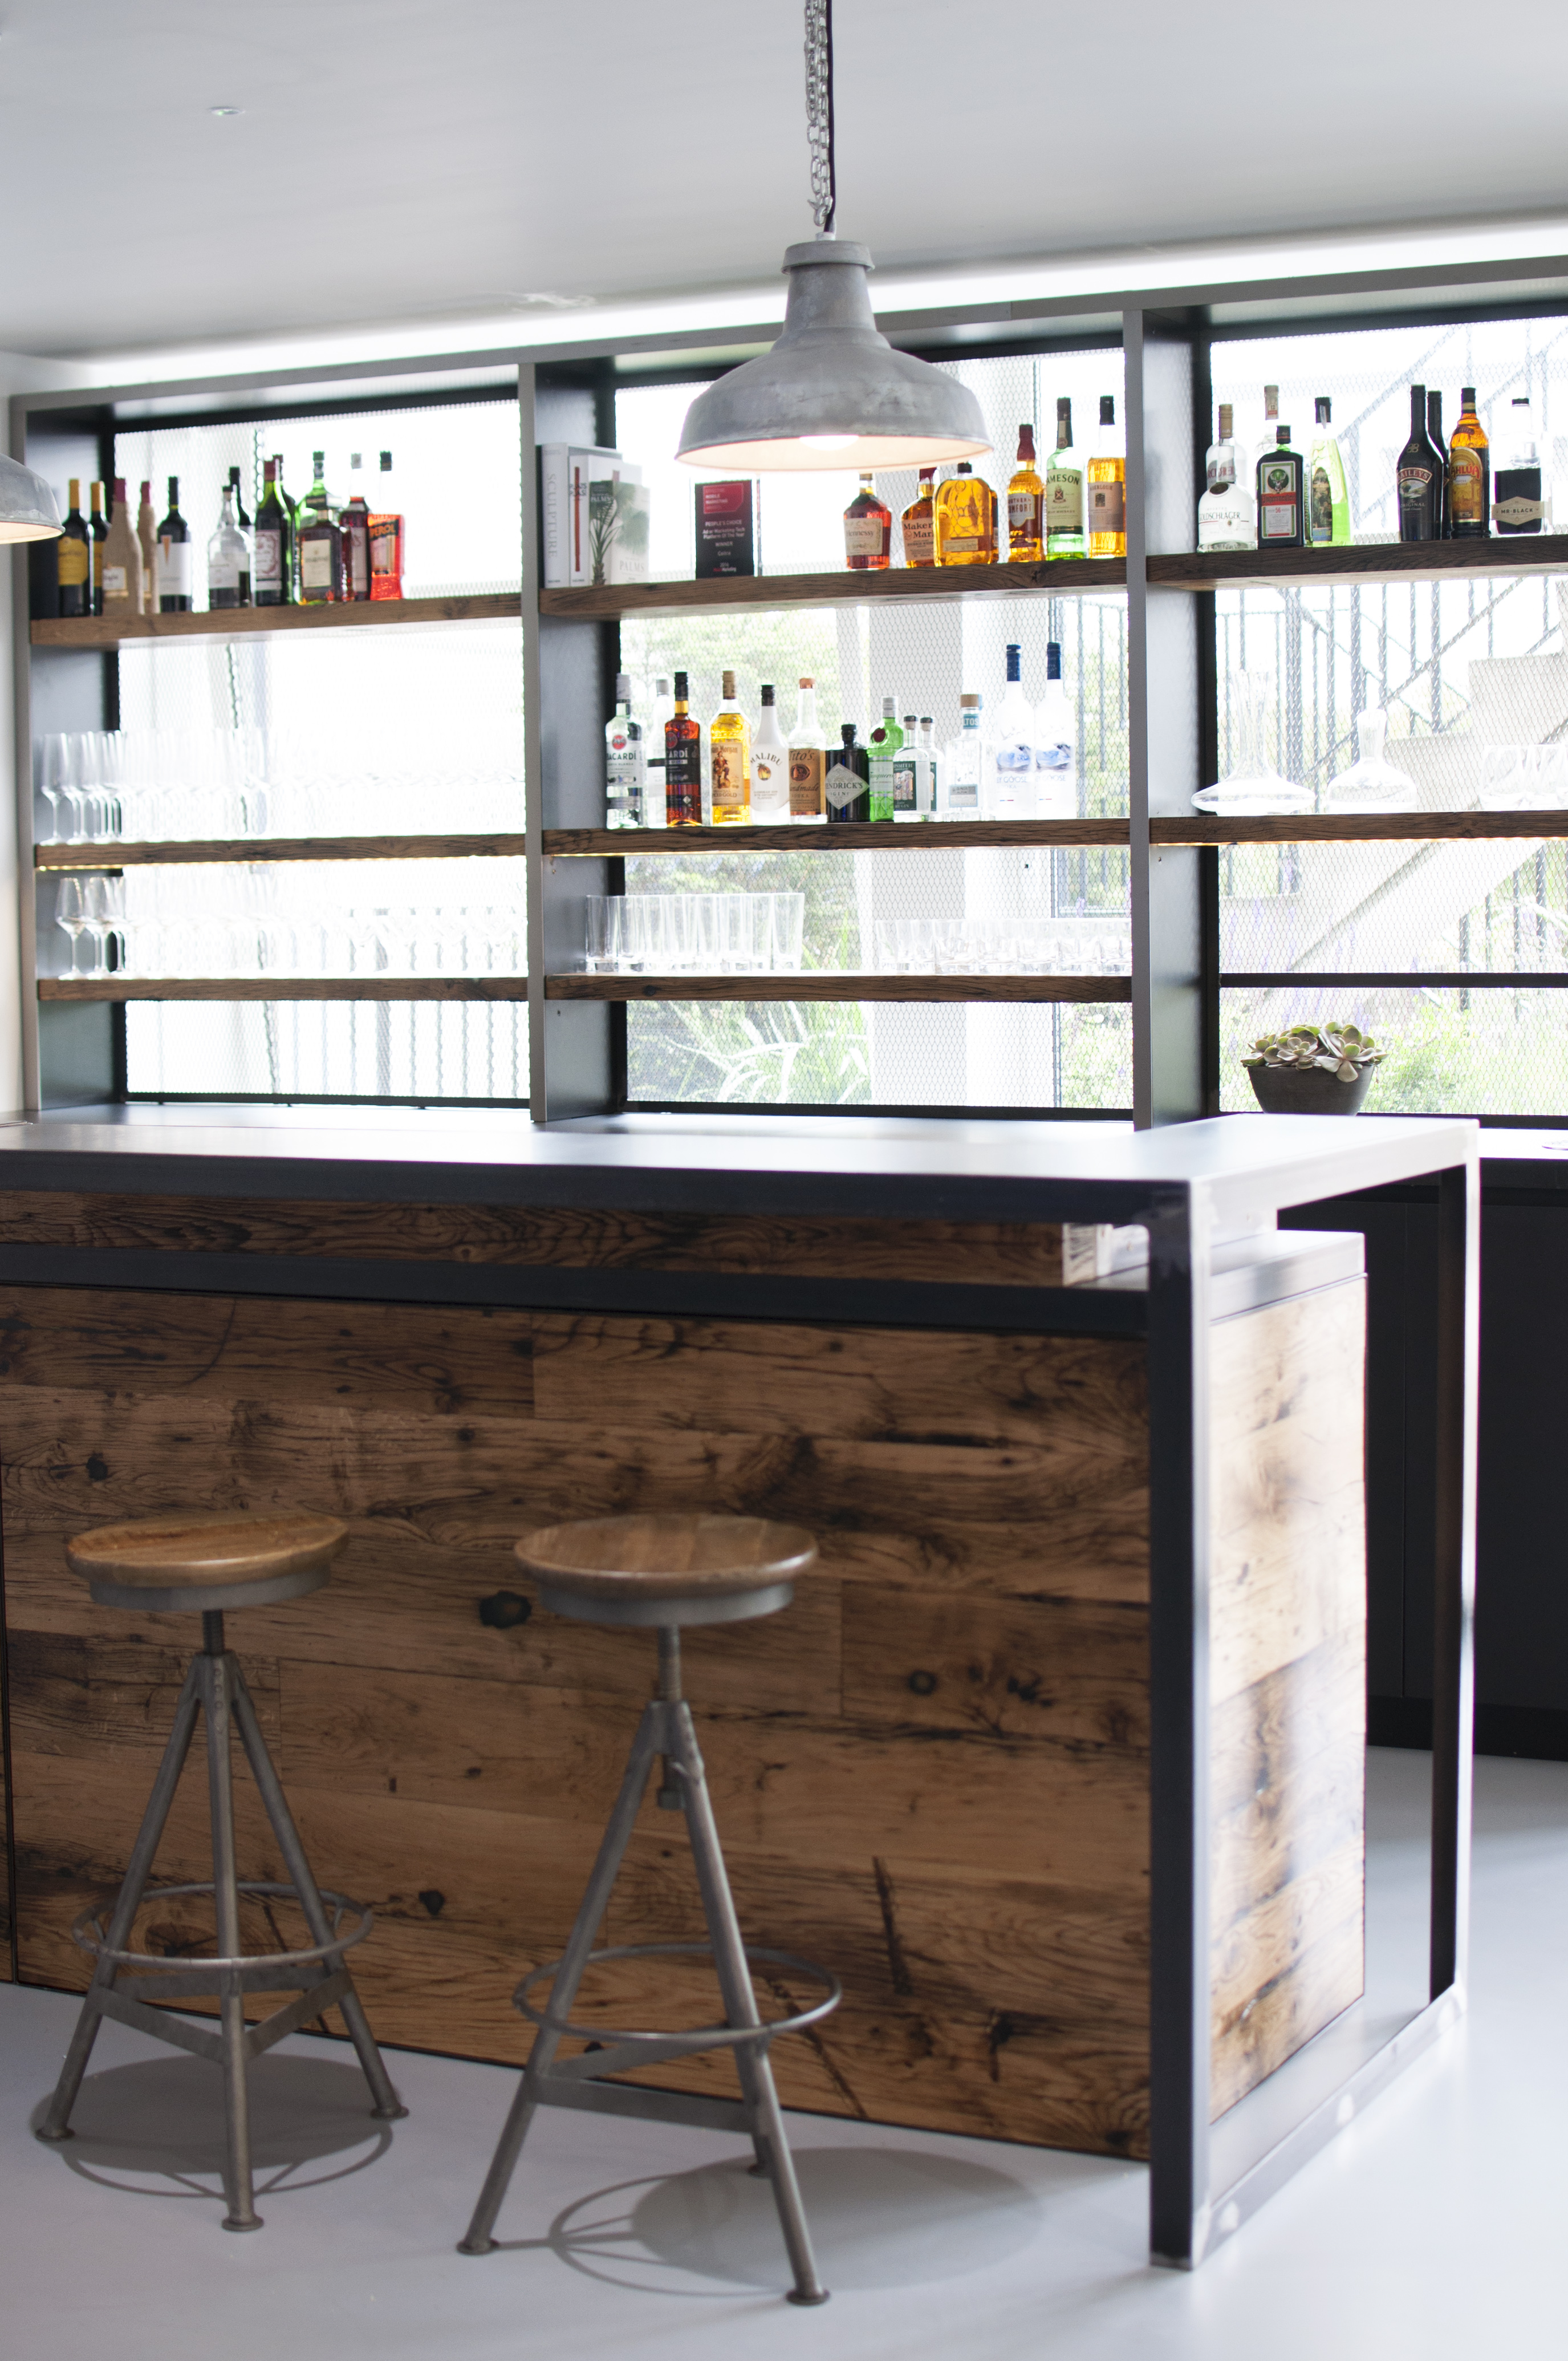 Wooden bar with stalls and glass shelving displaying alcohol and glasses